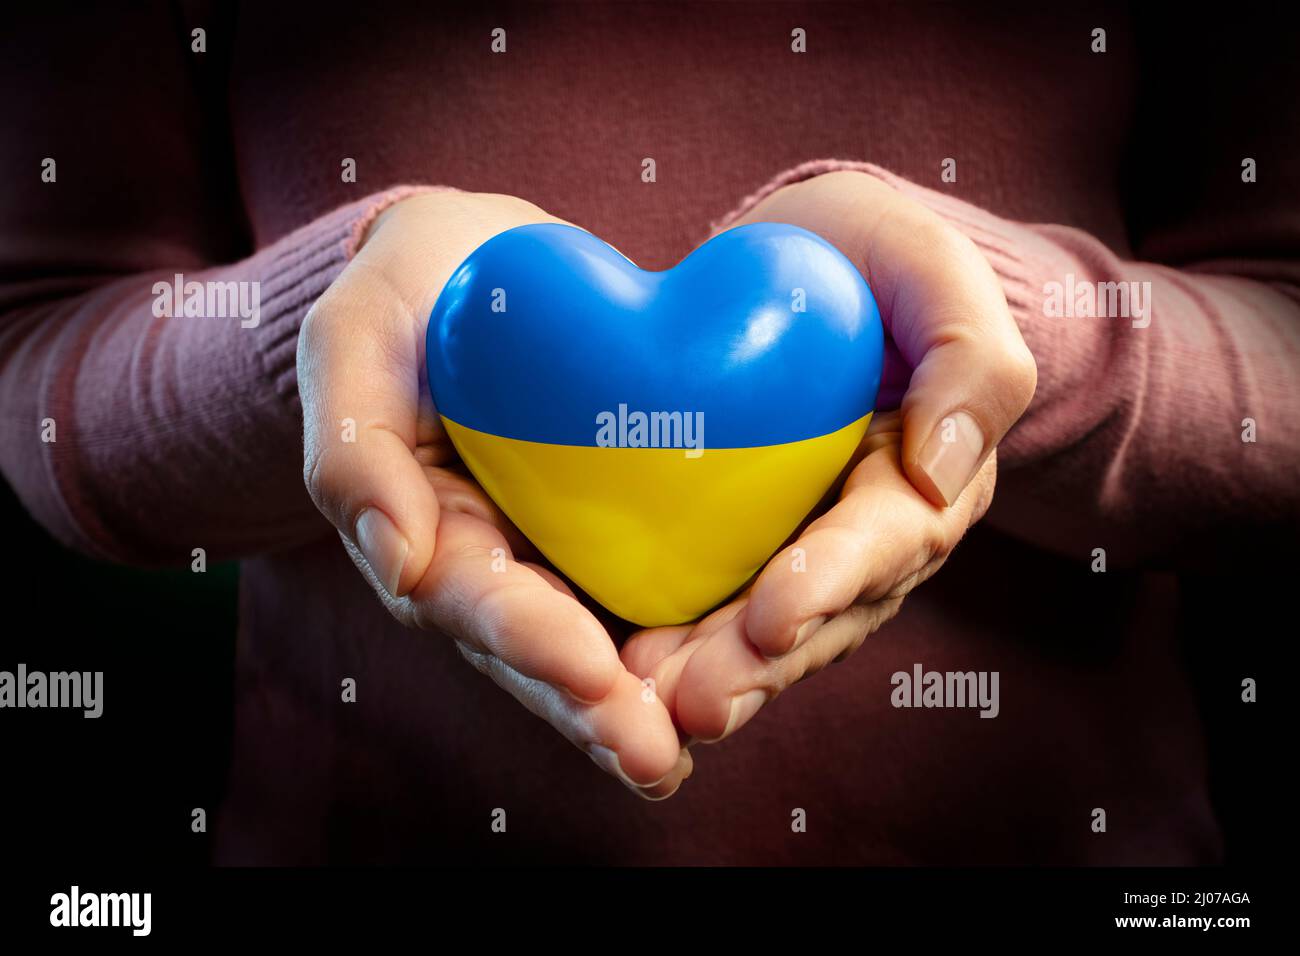 Pray For Ukraine - Hands With Heart And Ukrainian Flag - Peace And No War Concept Stock Photo